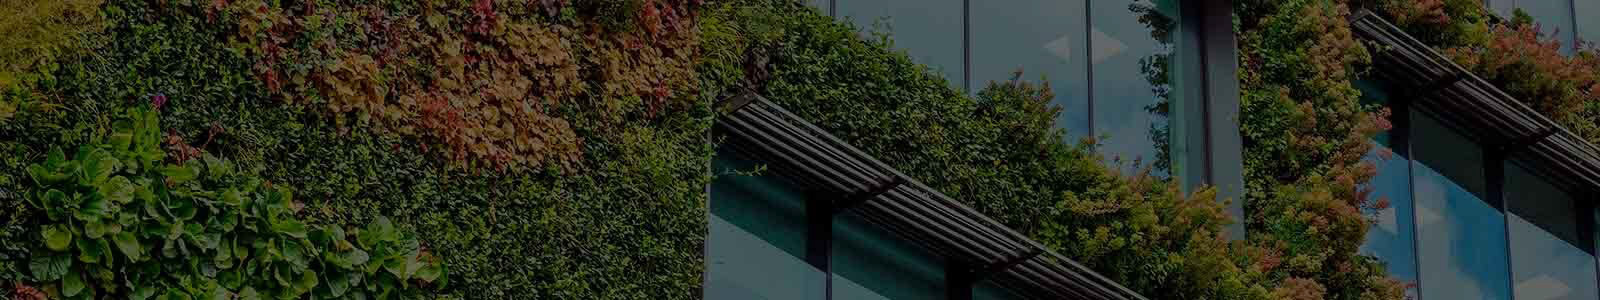 Zoomed in image of exterior of office building with living wall plants